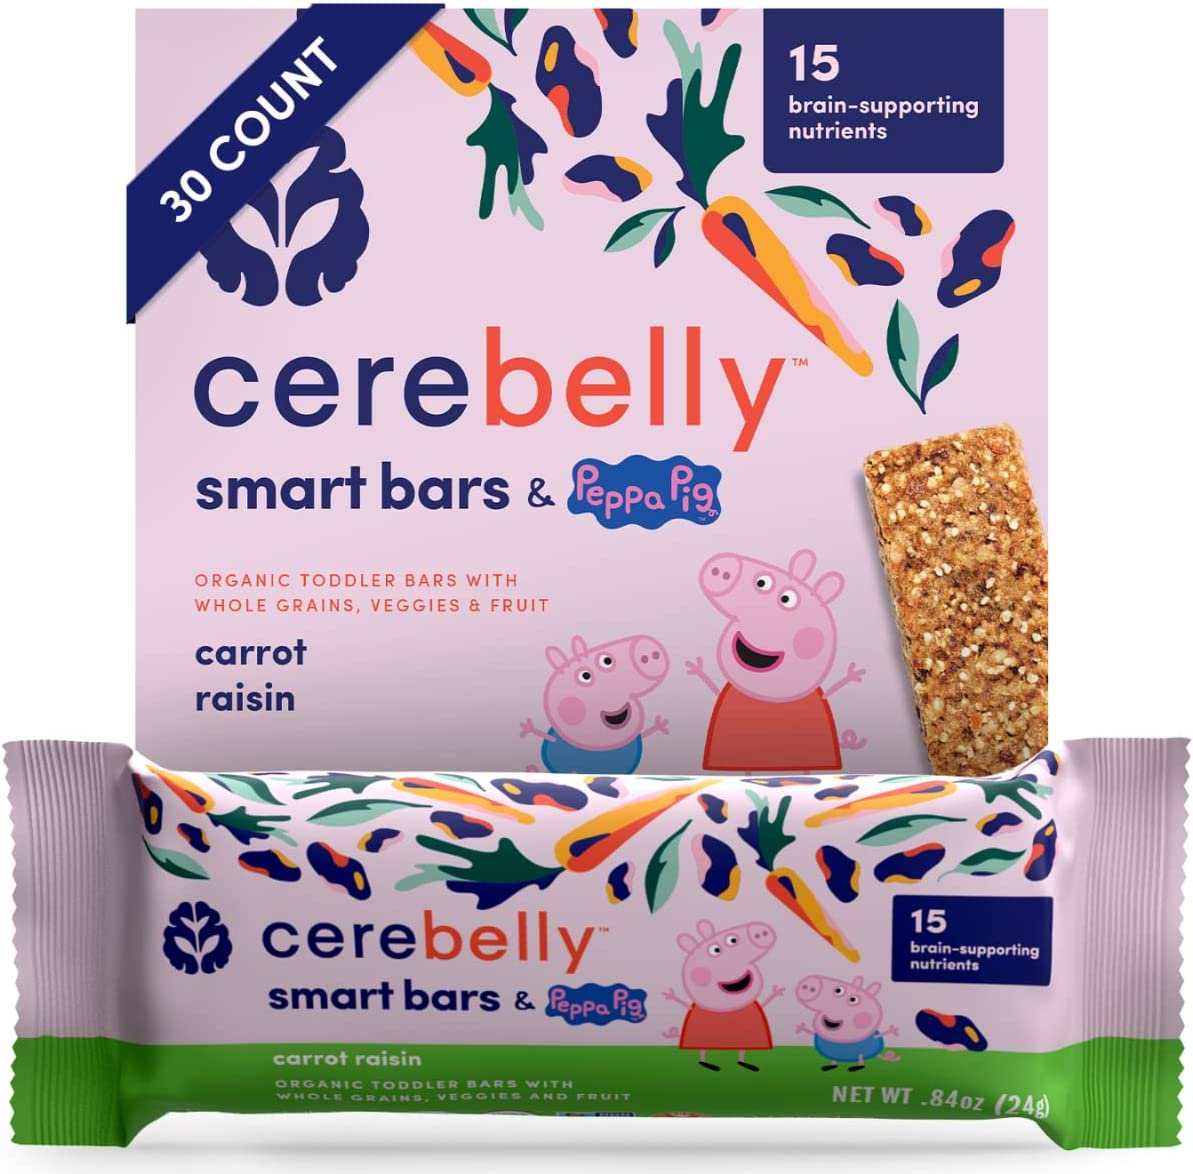 Cerebelly Toddler Snack Bars – Organic Peppa Pig Carrot Raisin (Pack of 30), Healthy Snack Bars for Kids – 15 Brain-supporting Nutrients from Superfoods – Gluten Free, Nut Free, No Added Sugar, Organic Whole Grain Nutrition Bars with Veggies & Fruit